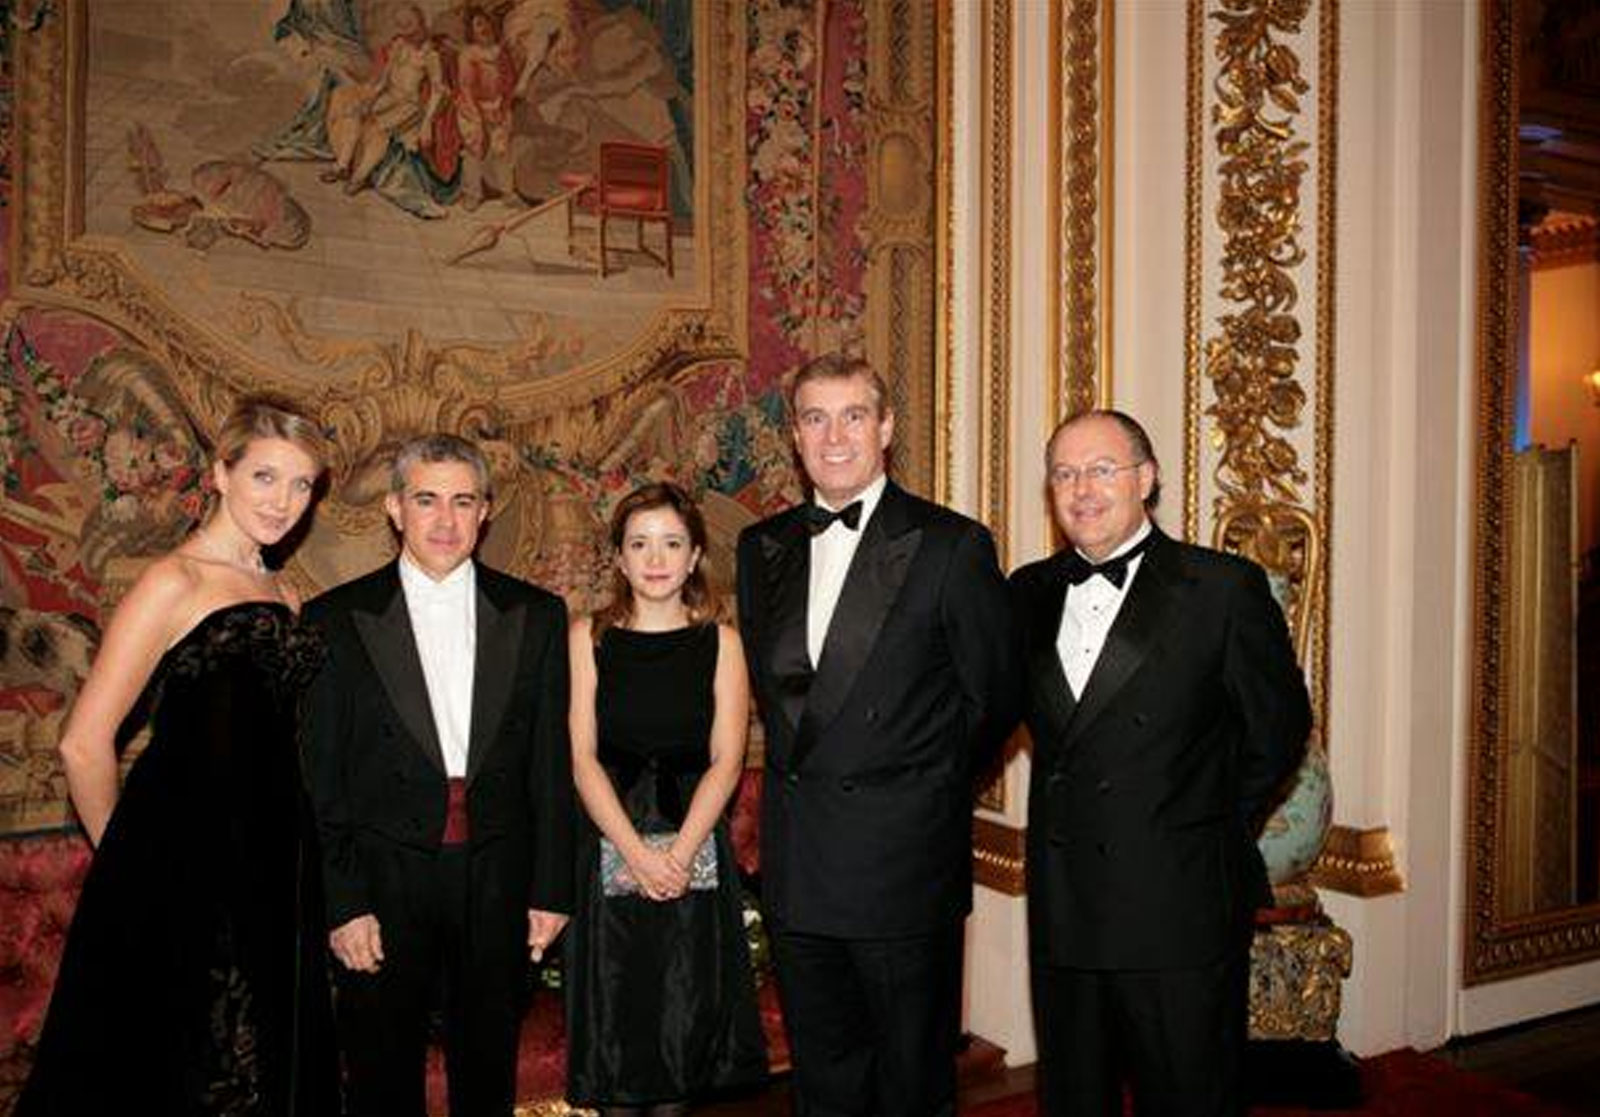 sldr_After_Performance_at_Buckingham_Palace_with_Prince_Andrew